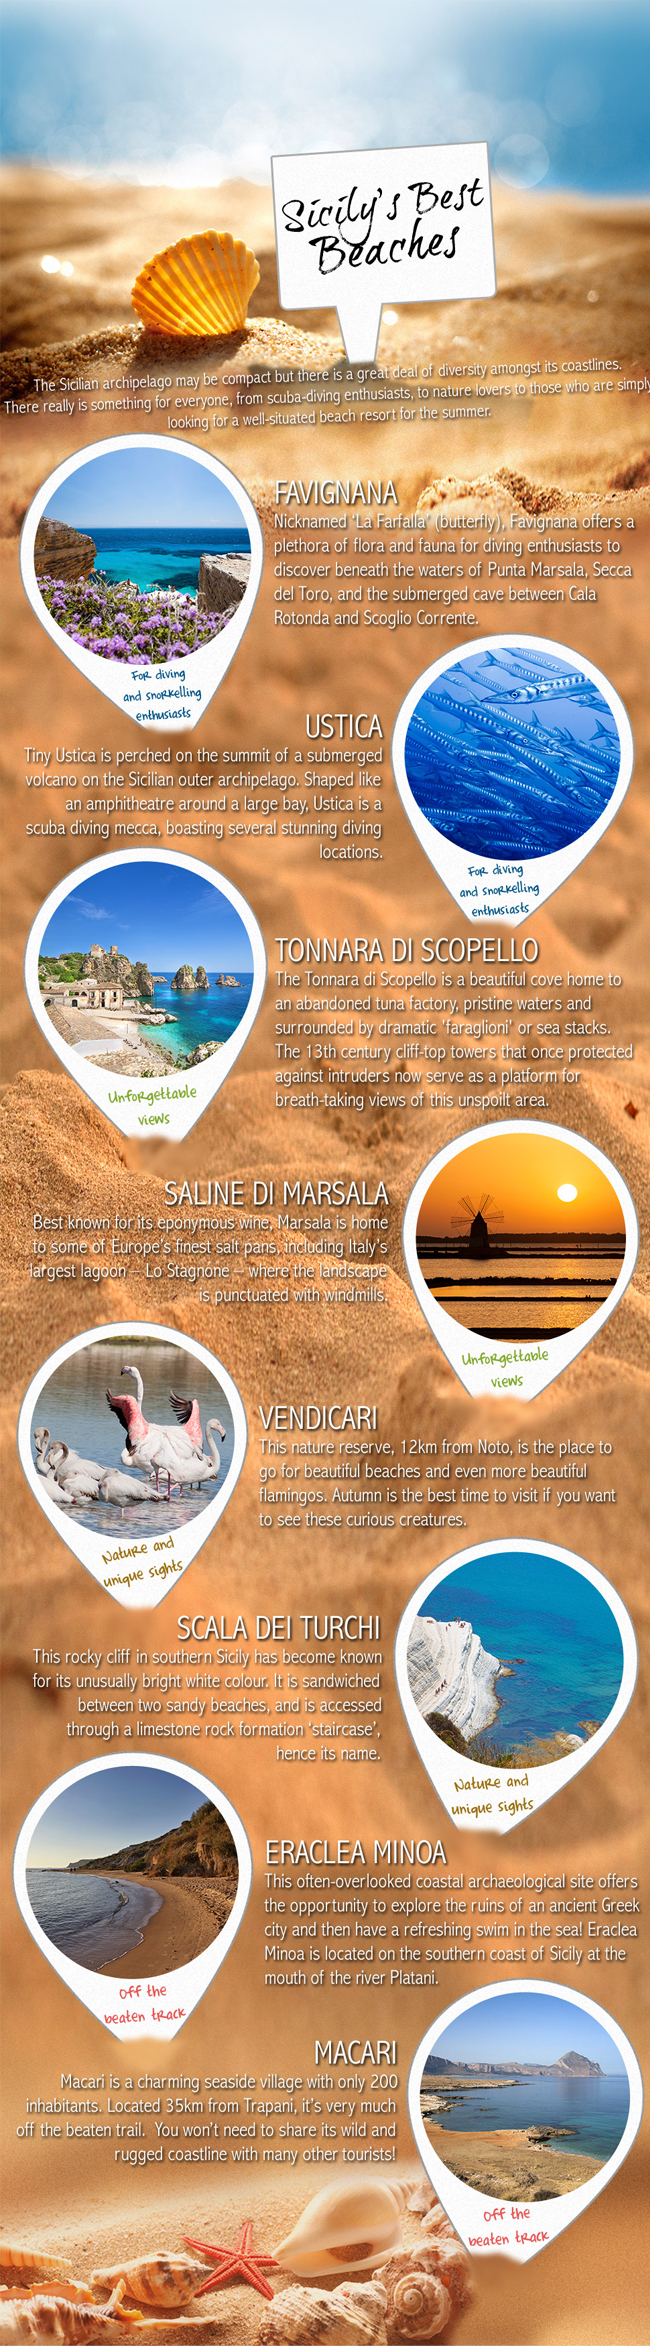 soloSicily-infographic